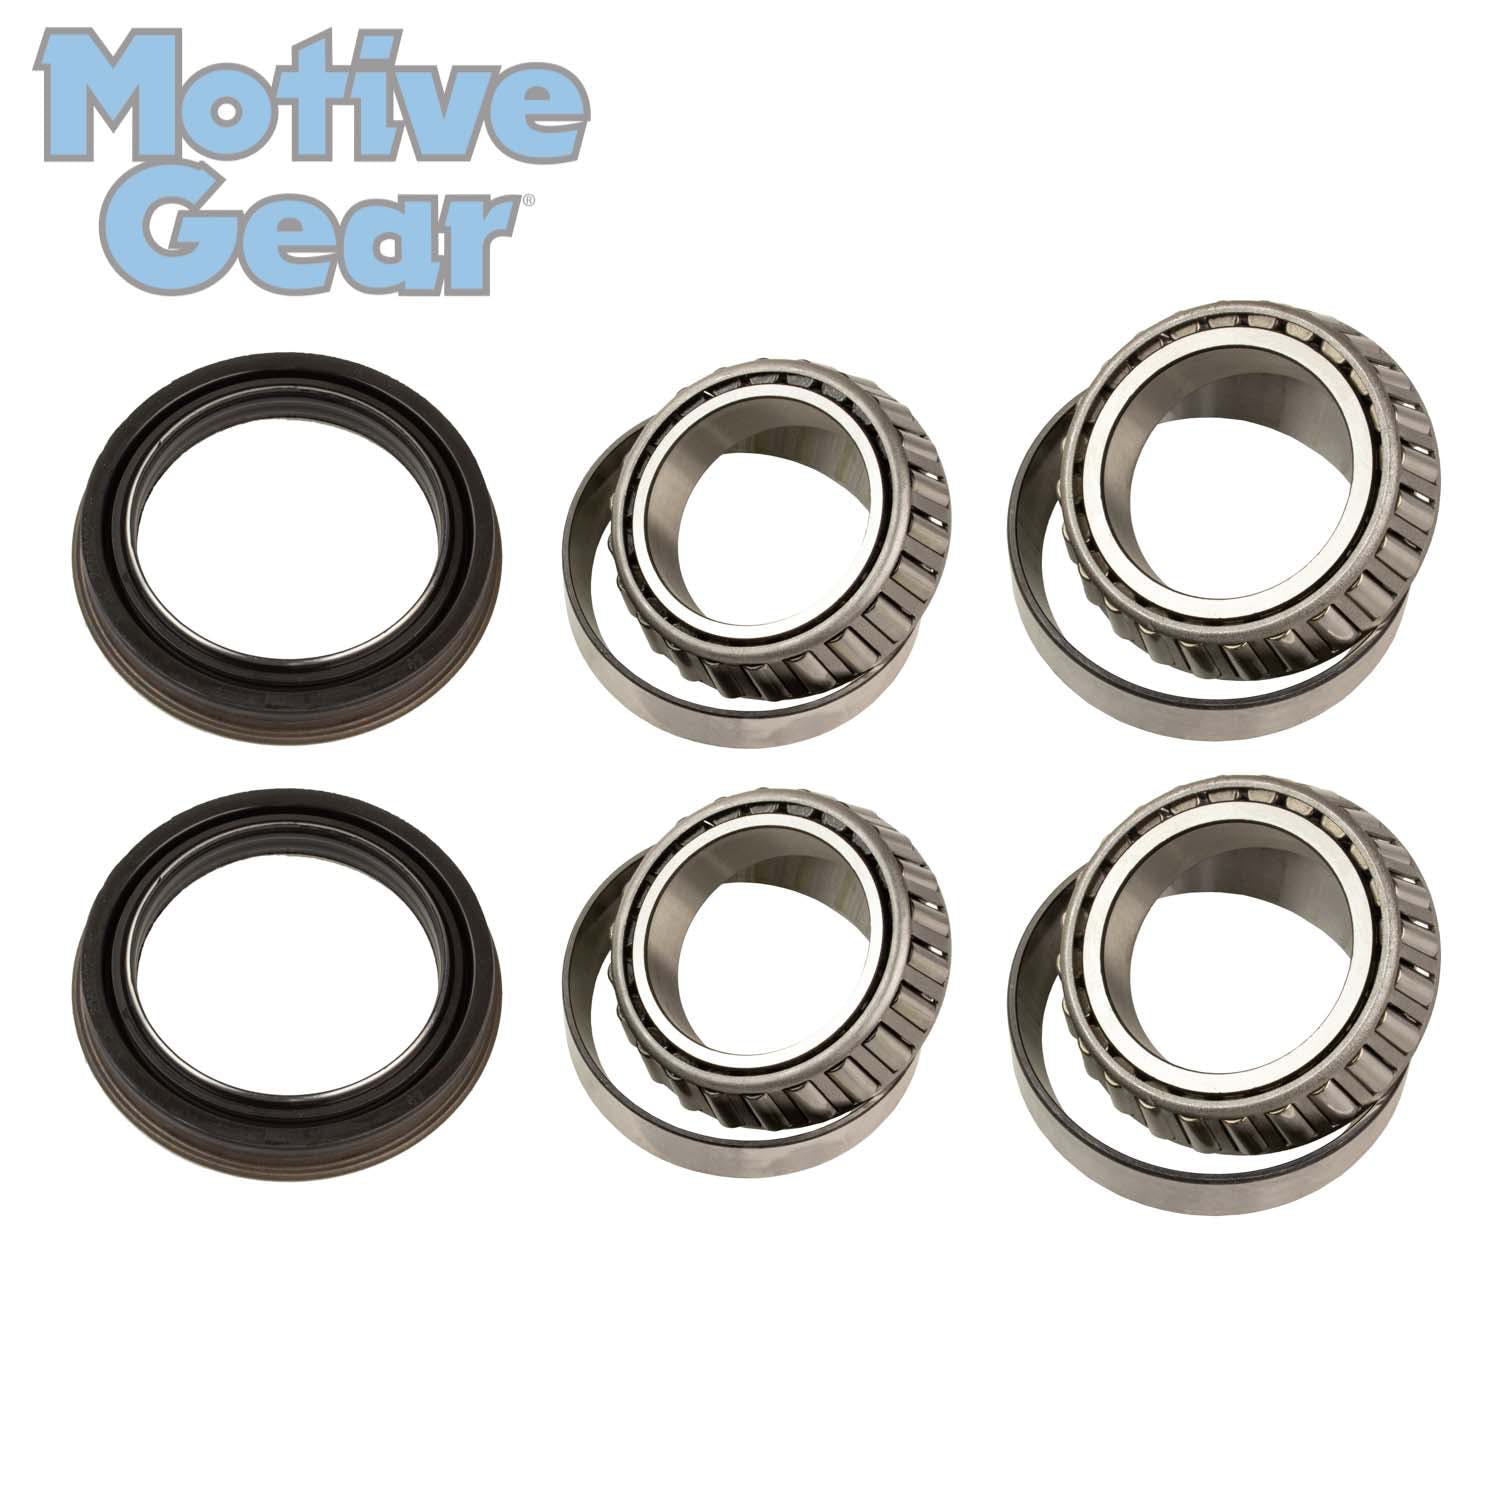 Motive Gear KIT GM11.5LATE Axle Bearing and Seal Kit